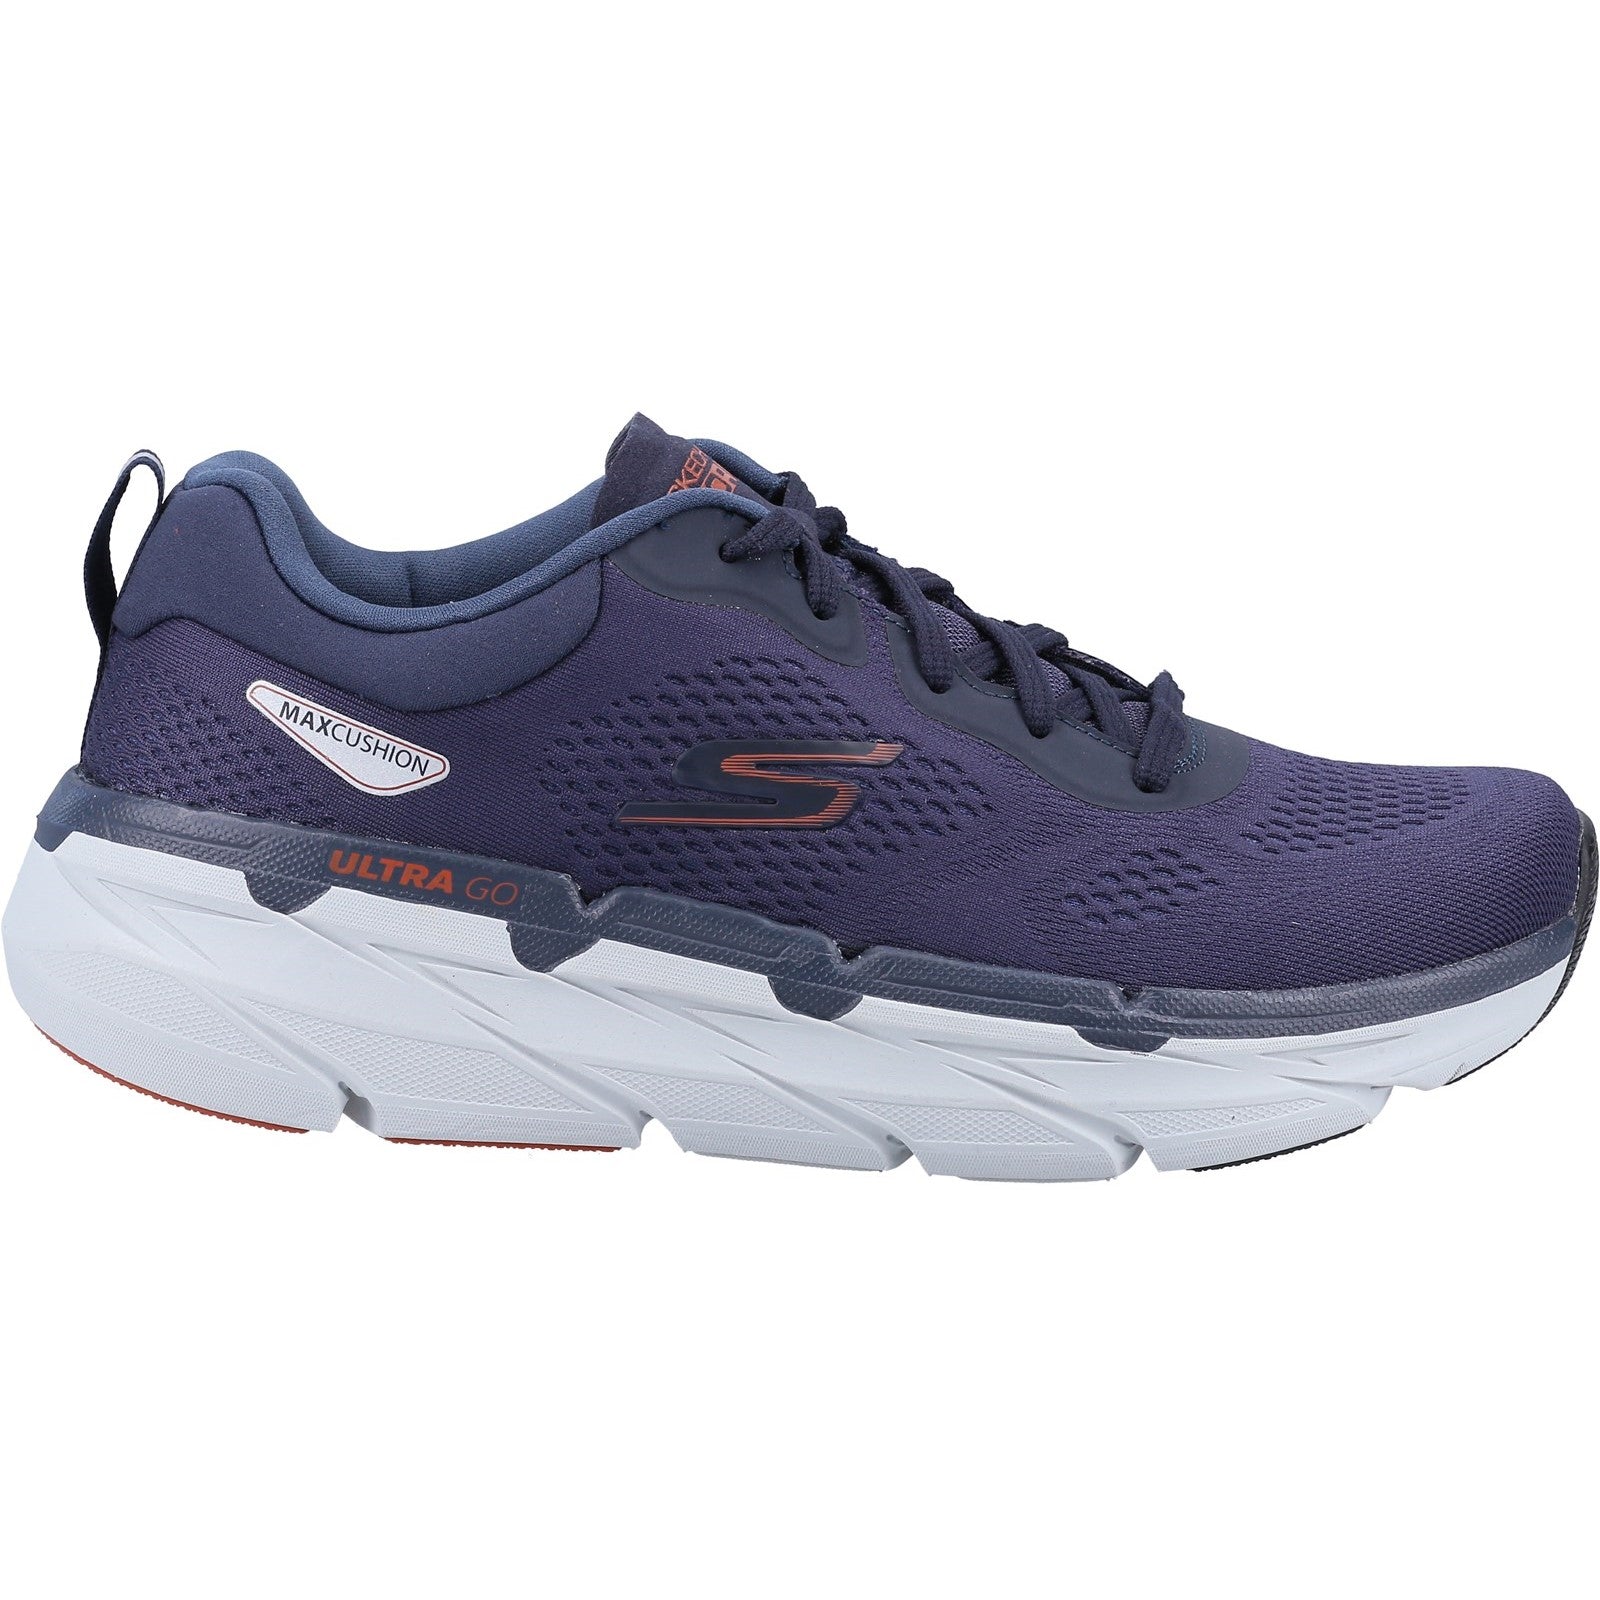 Skechers Mens Max Cushioning Premier Perspective Trainers - Navy